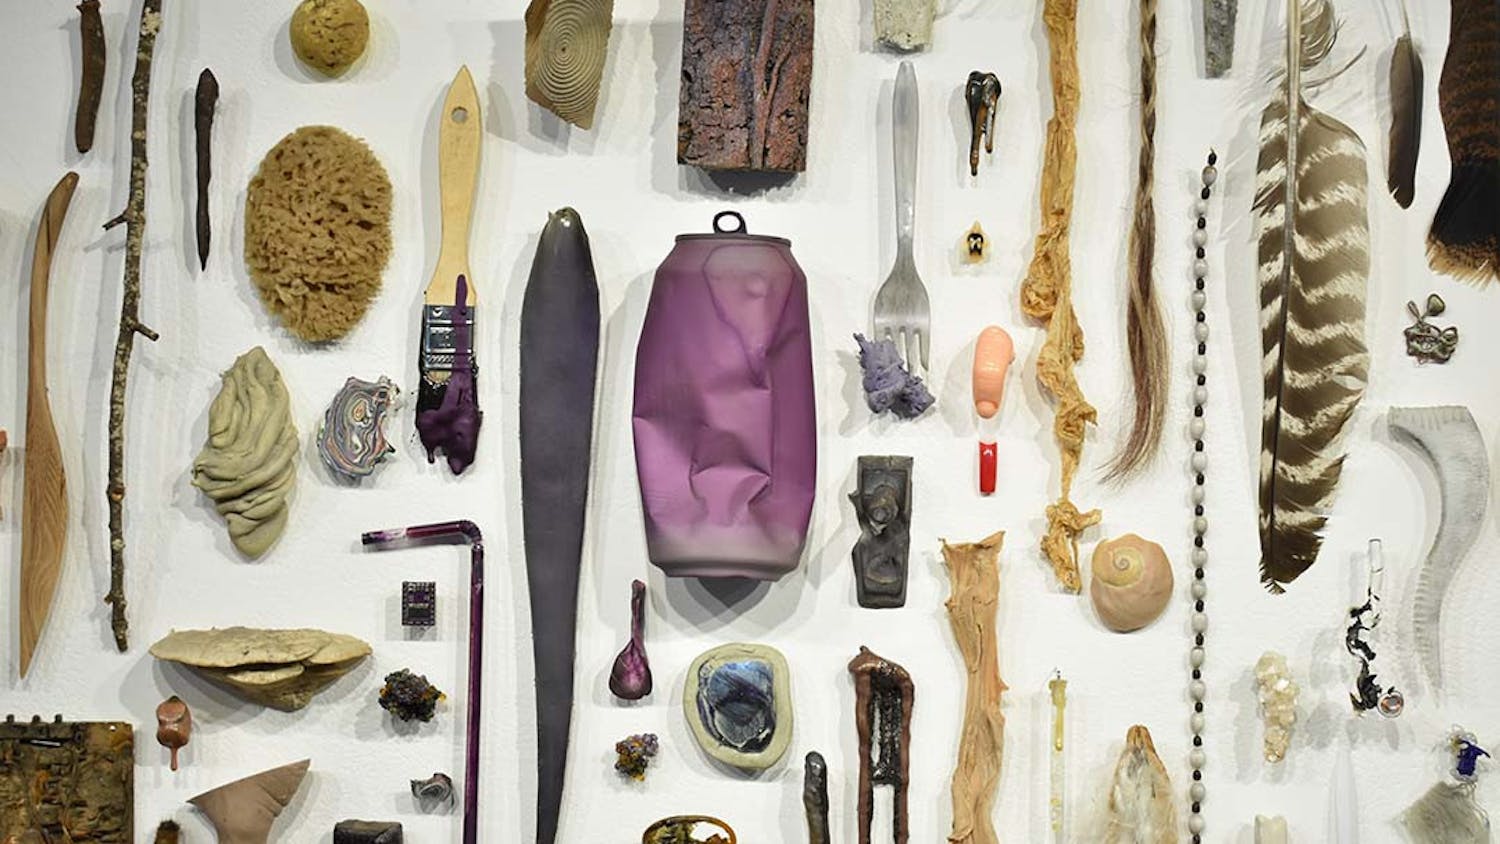 "Some Things" by Christopher Mahonski symbolizes the exhibit’s theme of the connection between ecological and socio-cultural advancements. This piece is constructed from materials ranging from trash to treasures.